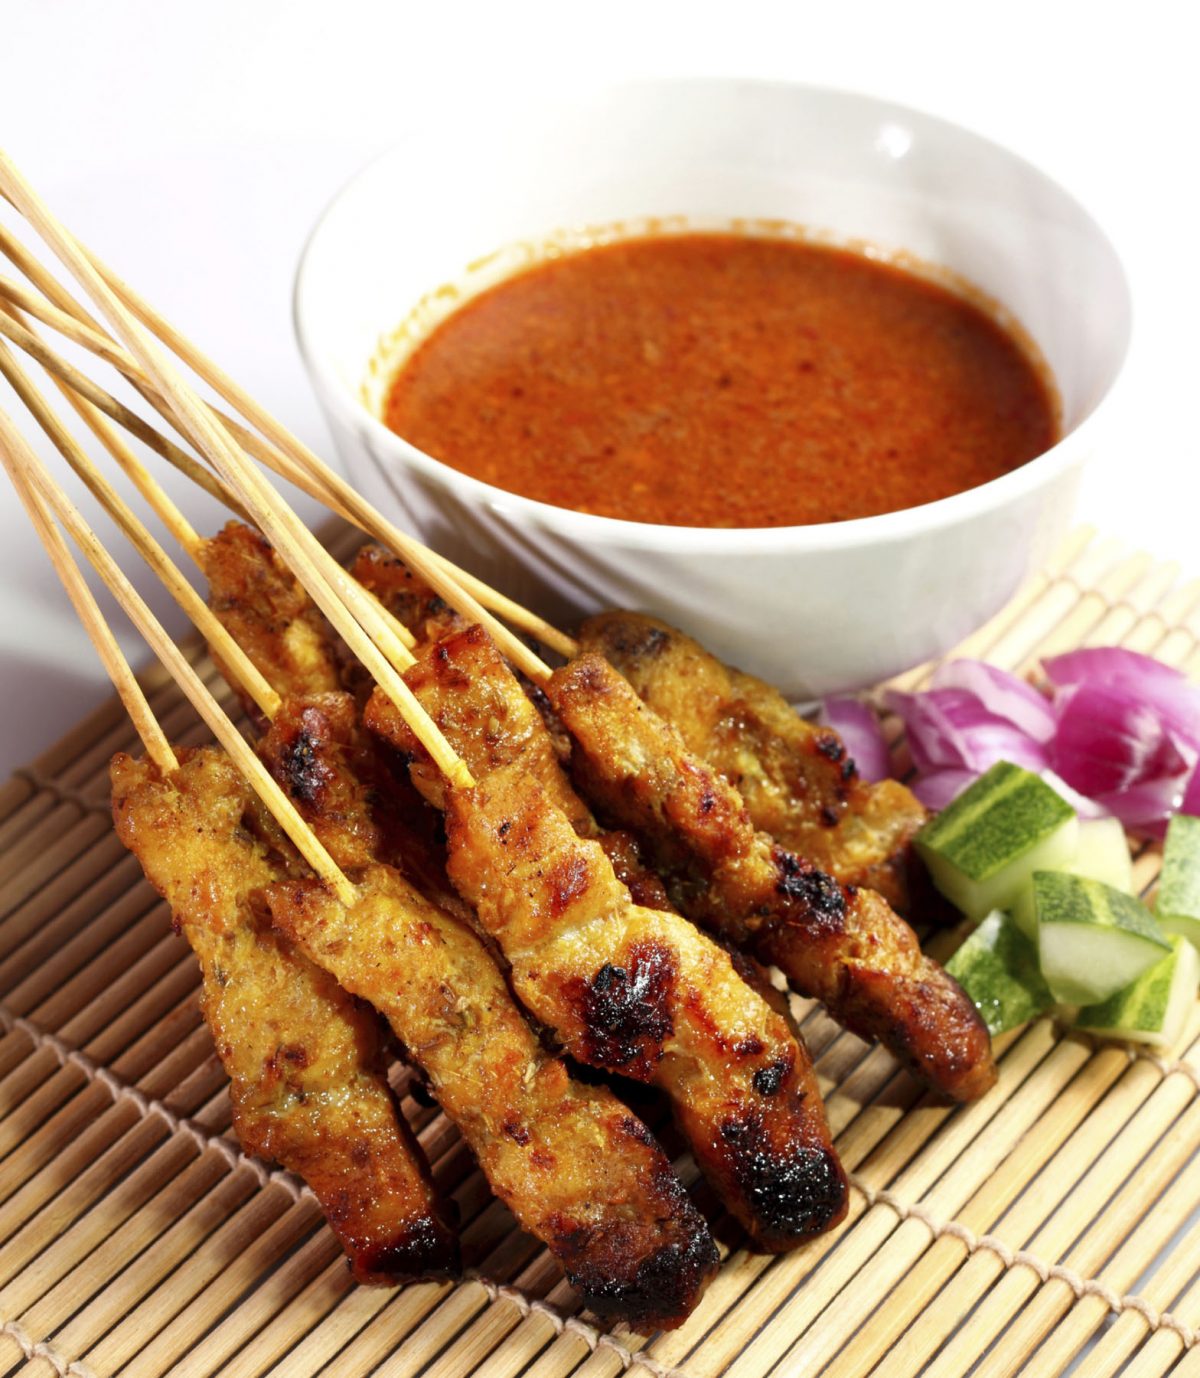 Grilled pork on skewers with peanut sauce. (dolphfyn/iStock/Thinkstock)